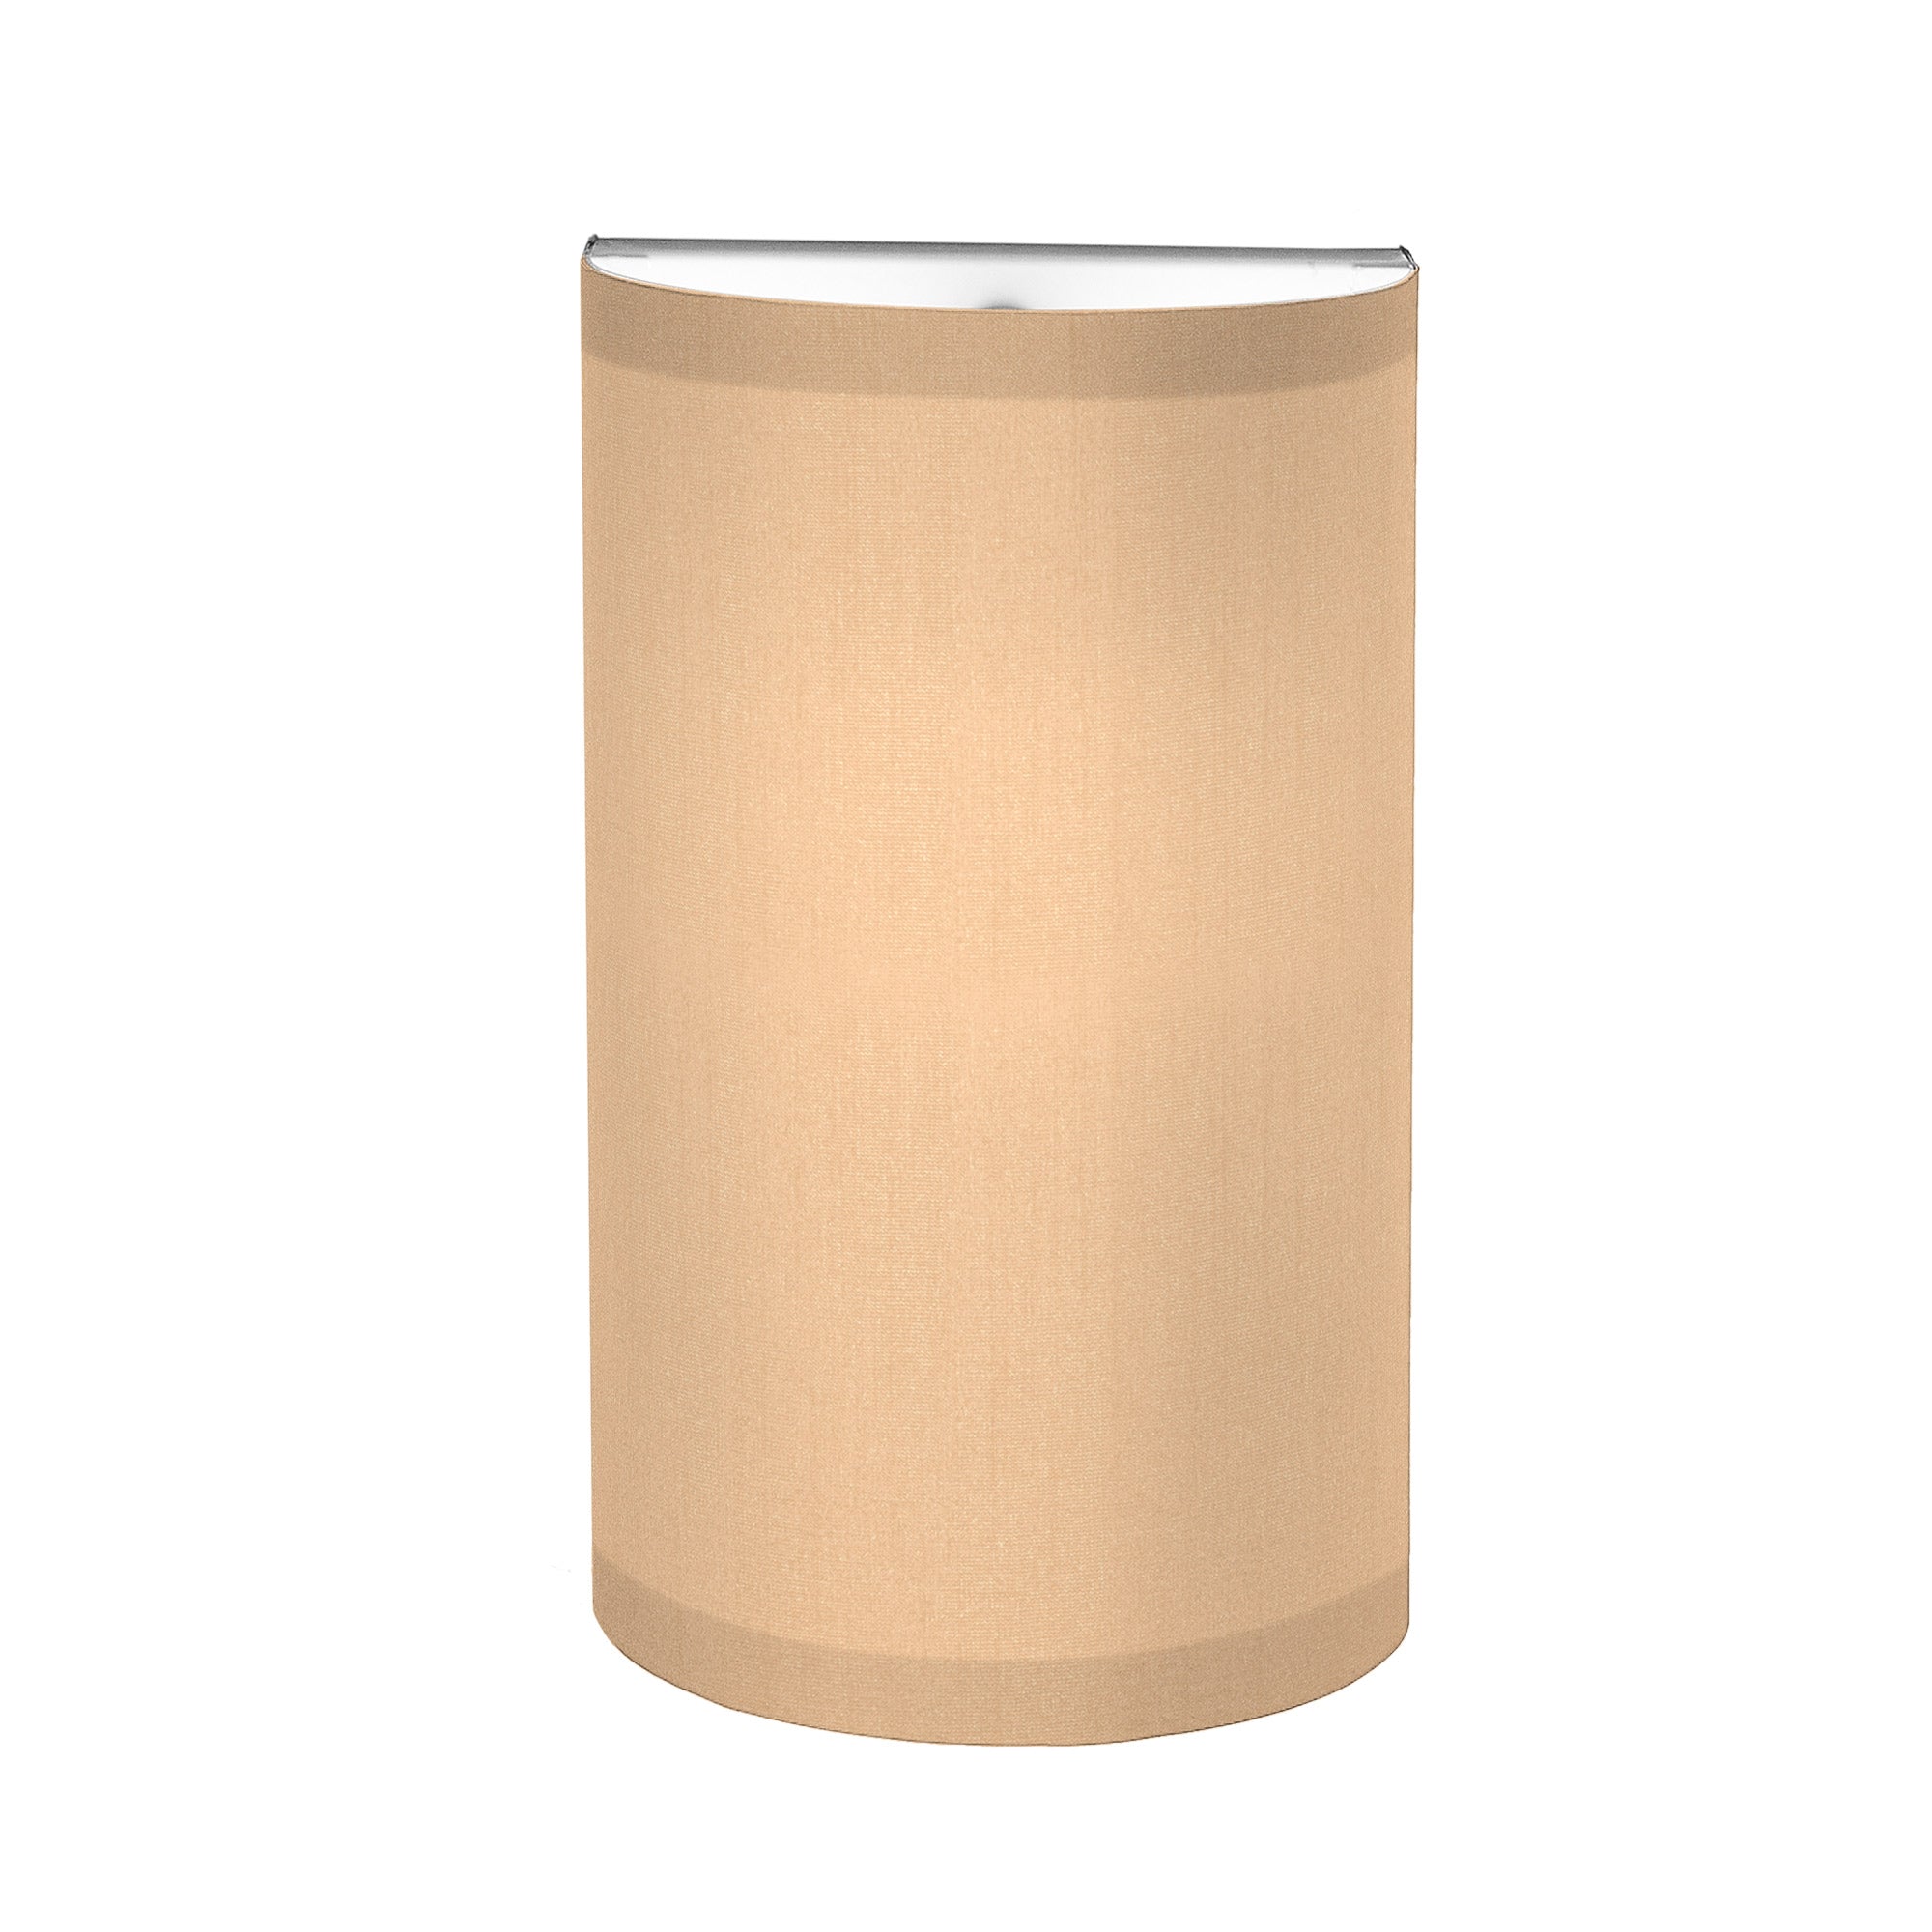 The Myra Wall Sconce from Seascape Fixtures in silk, champagne color.